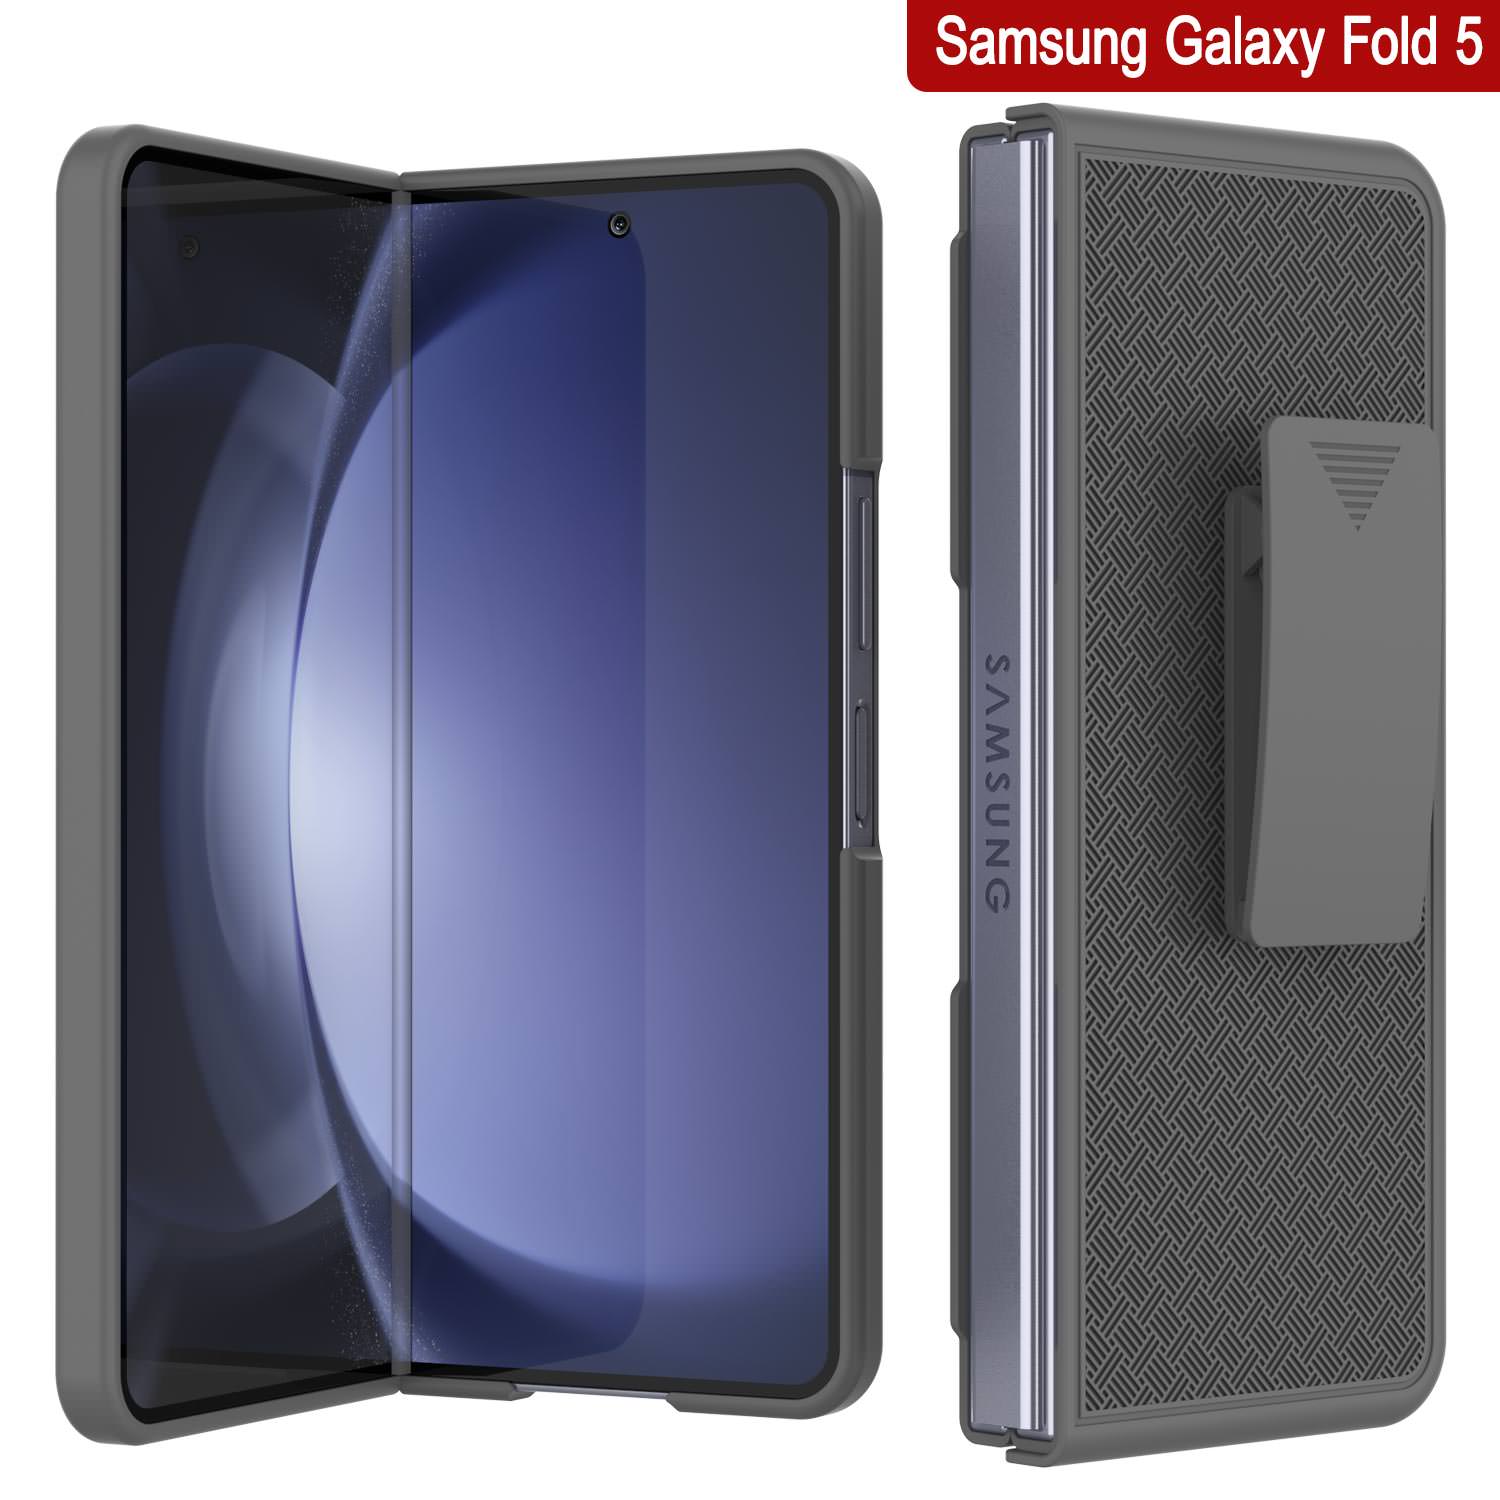 Galaxy Z Fold5 Case With Tempered Glass Screen Protector, Holster Belt Clip & Built-In Kickstand [Grey]